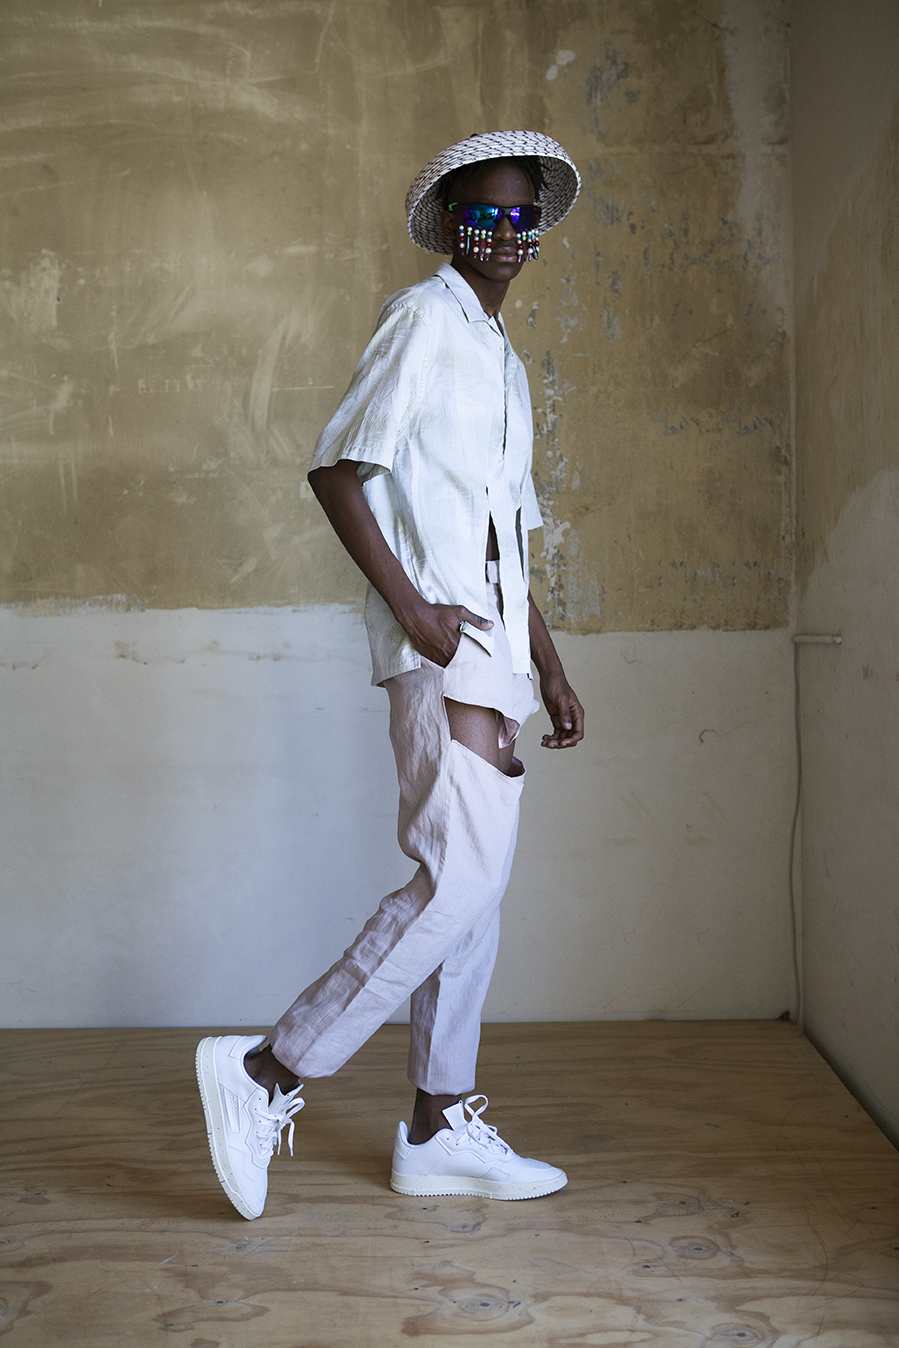 Irene Heldens X Calico Jack RE-DESIGN sustainable fashion collection - Will Falize - Pastel cut-out pants and shirt